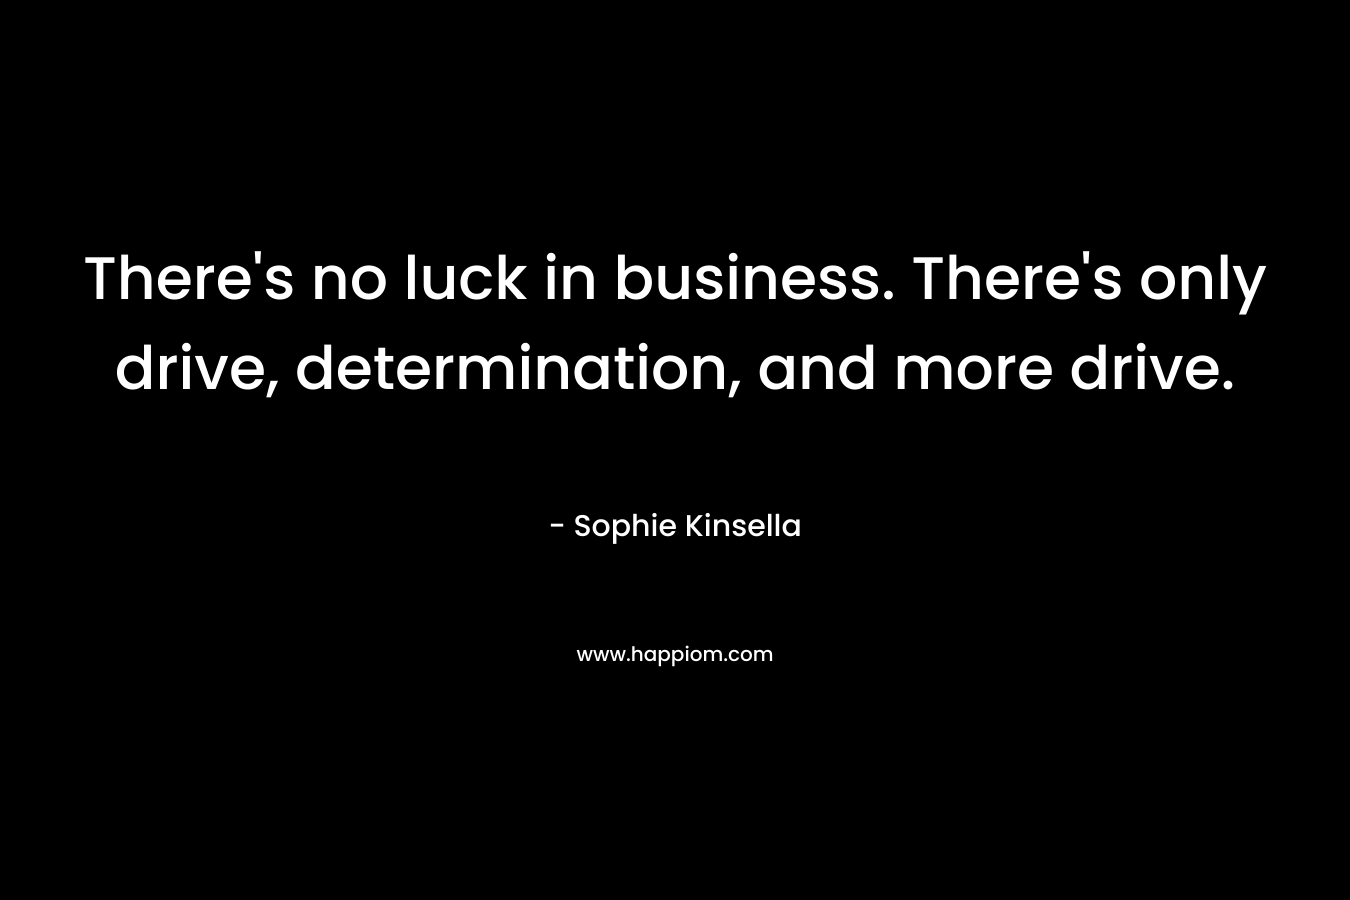 There's no luck in business. There's only drive, determination, and more drive.